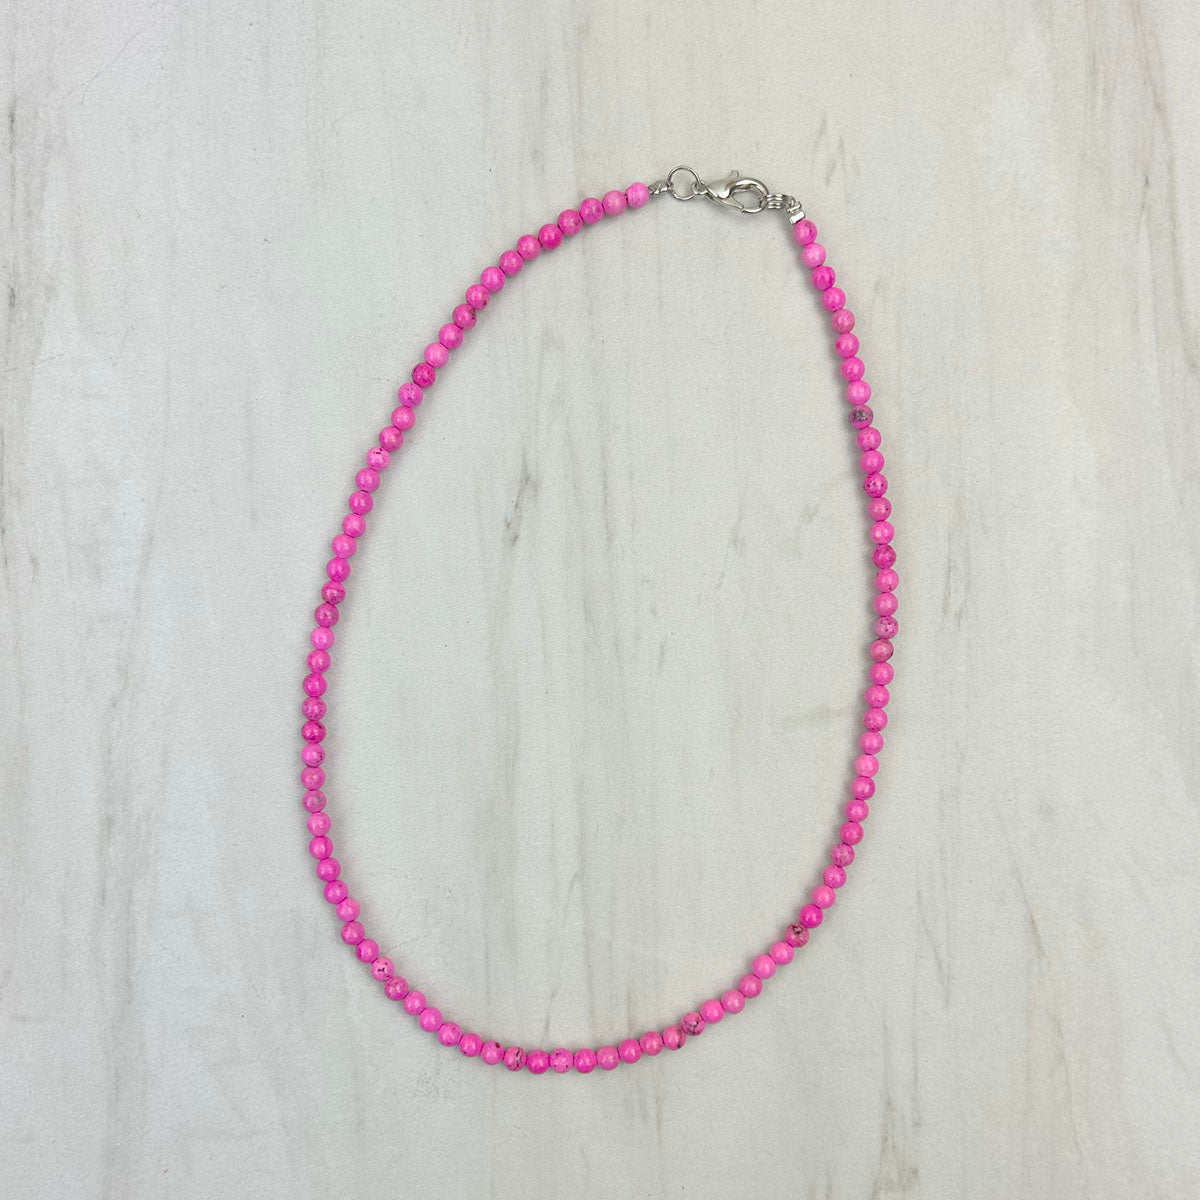 NKS231216-01                             16 inches 4mm hot pink stone beads Necklace